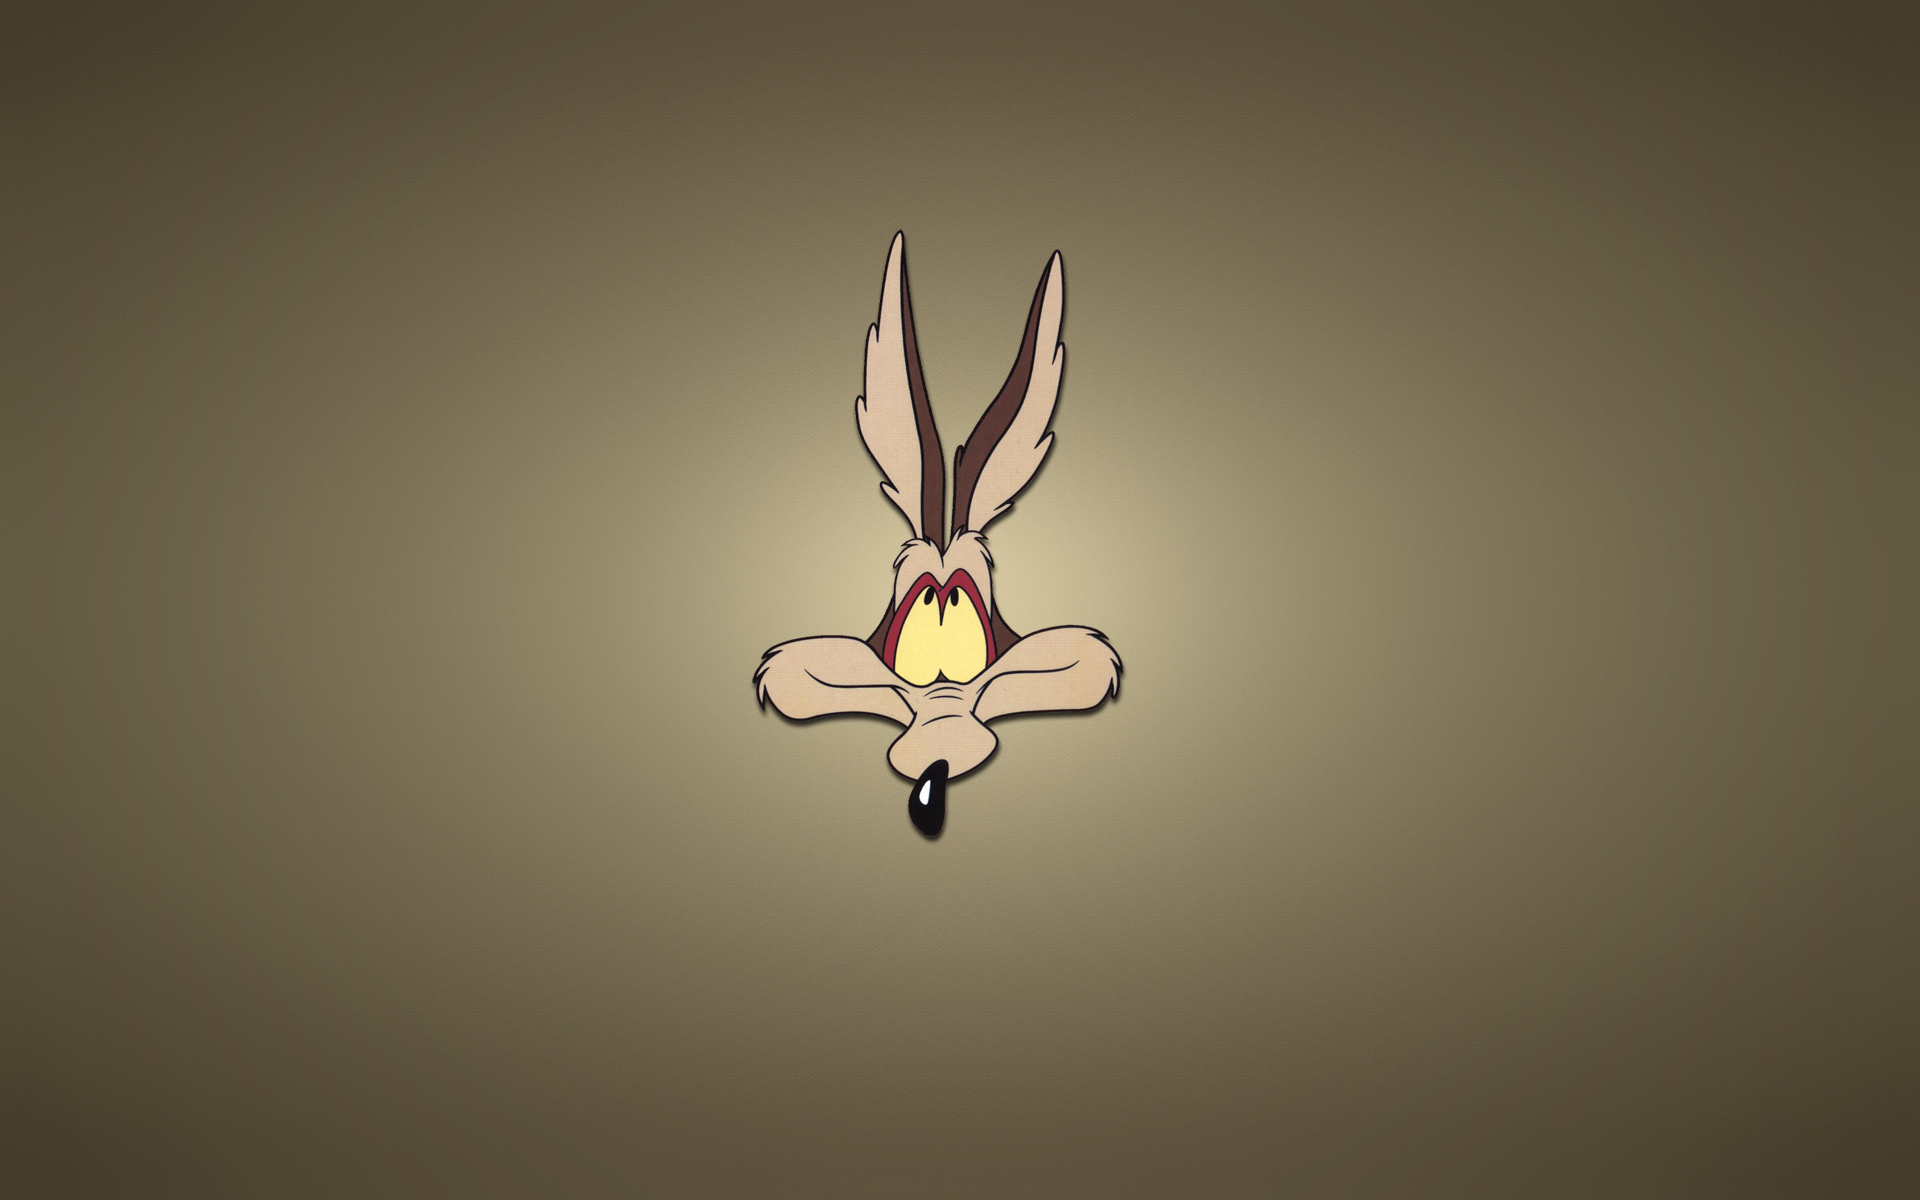 Looney Tunes Backgrounds   Wallpaper High Definition High Quality 1920x1200